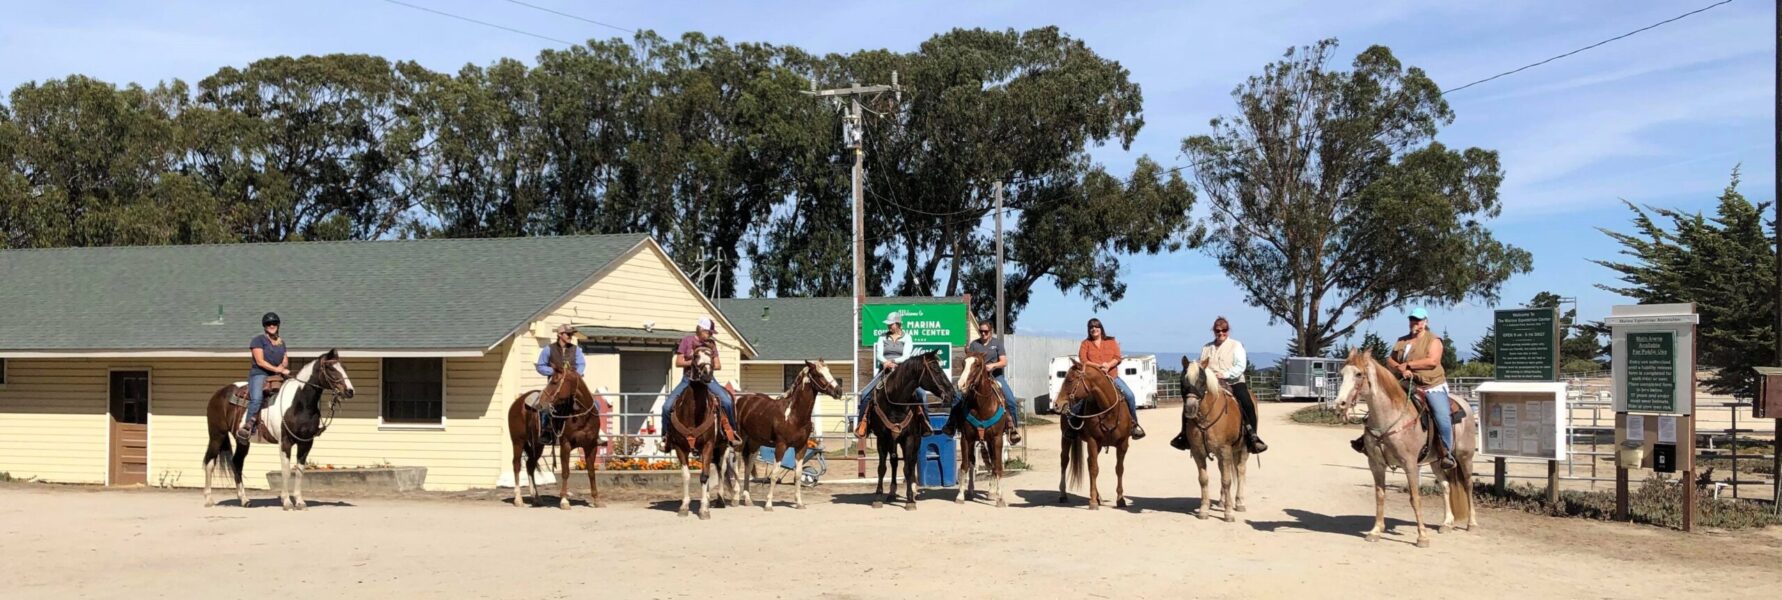 MB Equestrians In Front Of Marina Equestrian Center